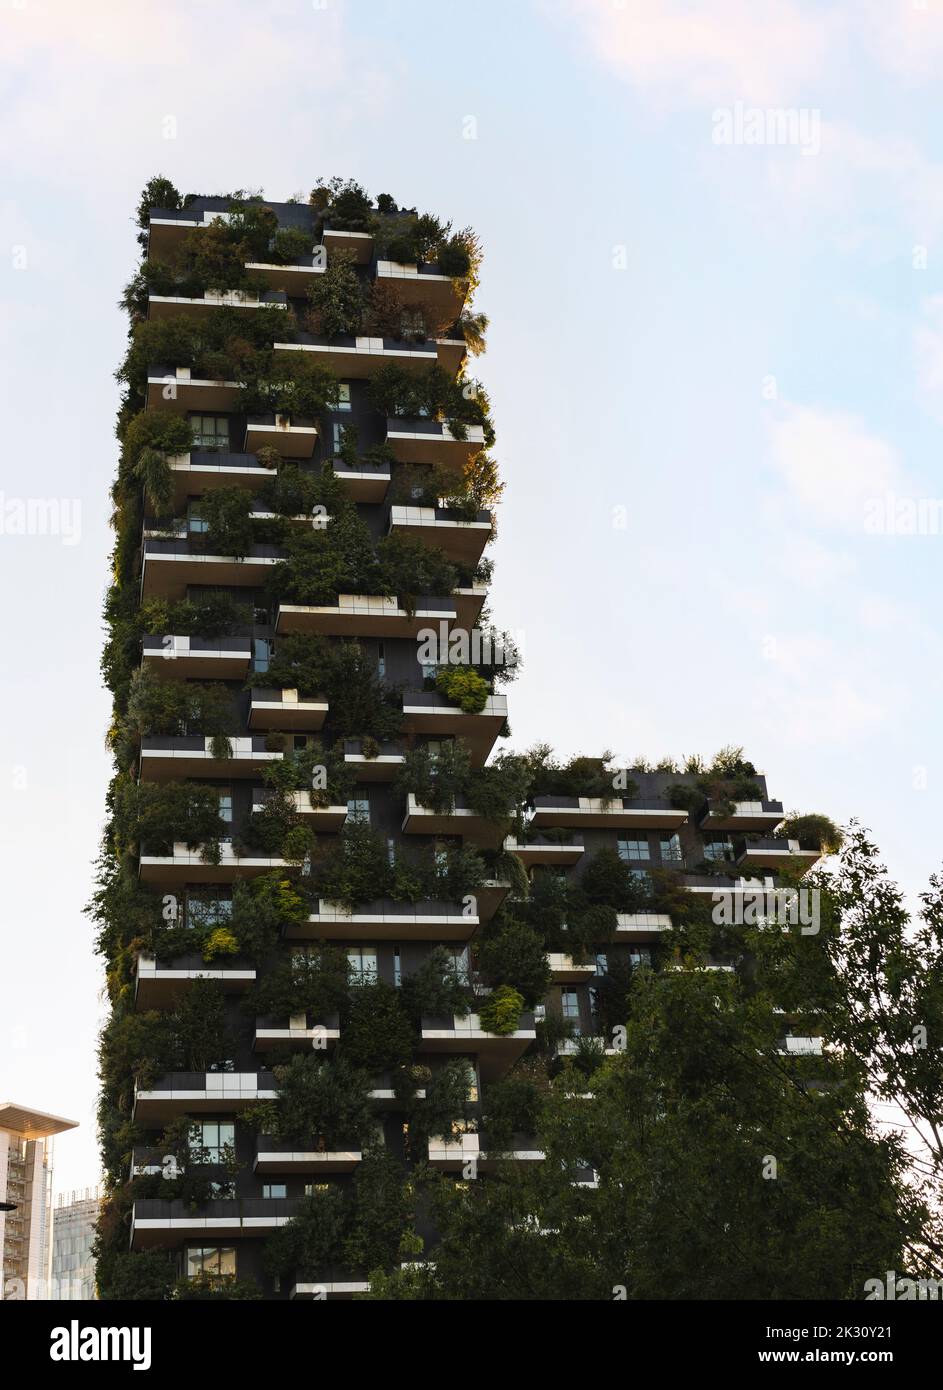 Apartments with vertical garden in front of sky Stock Photo